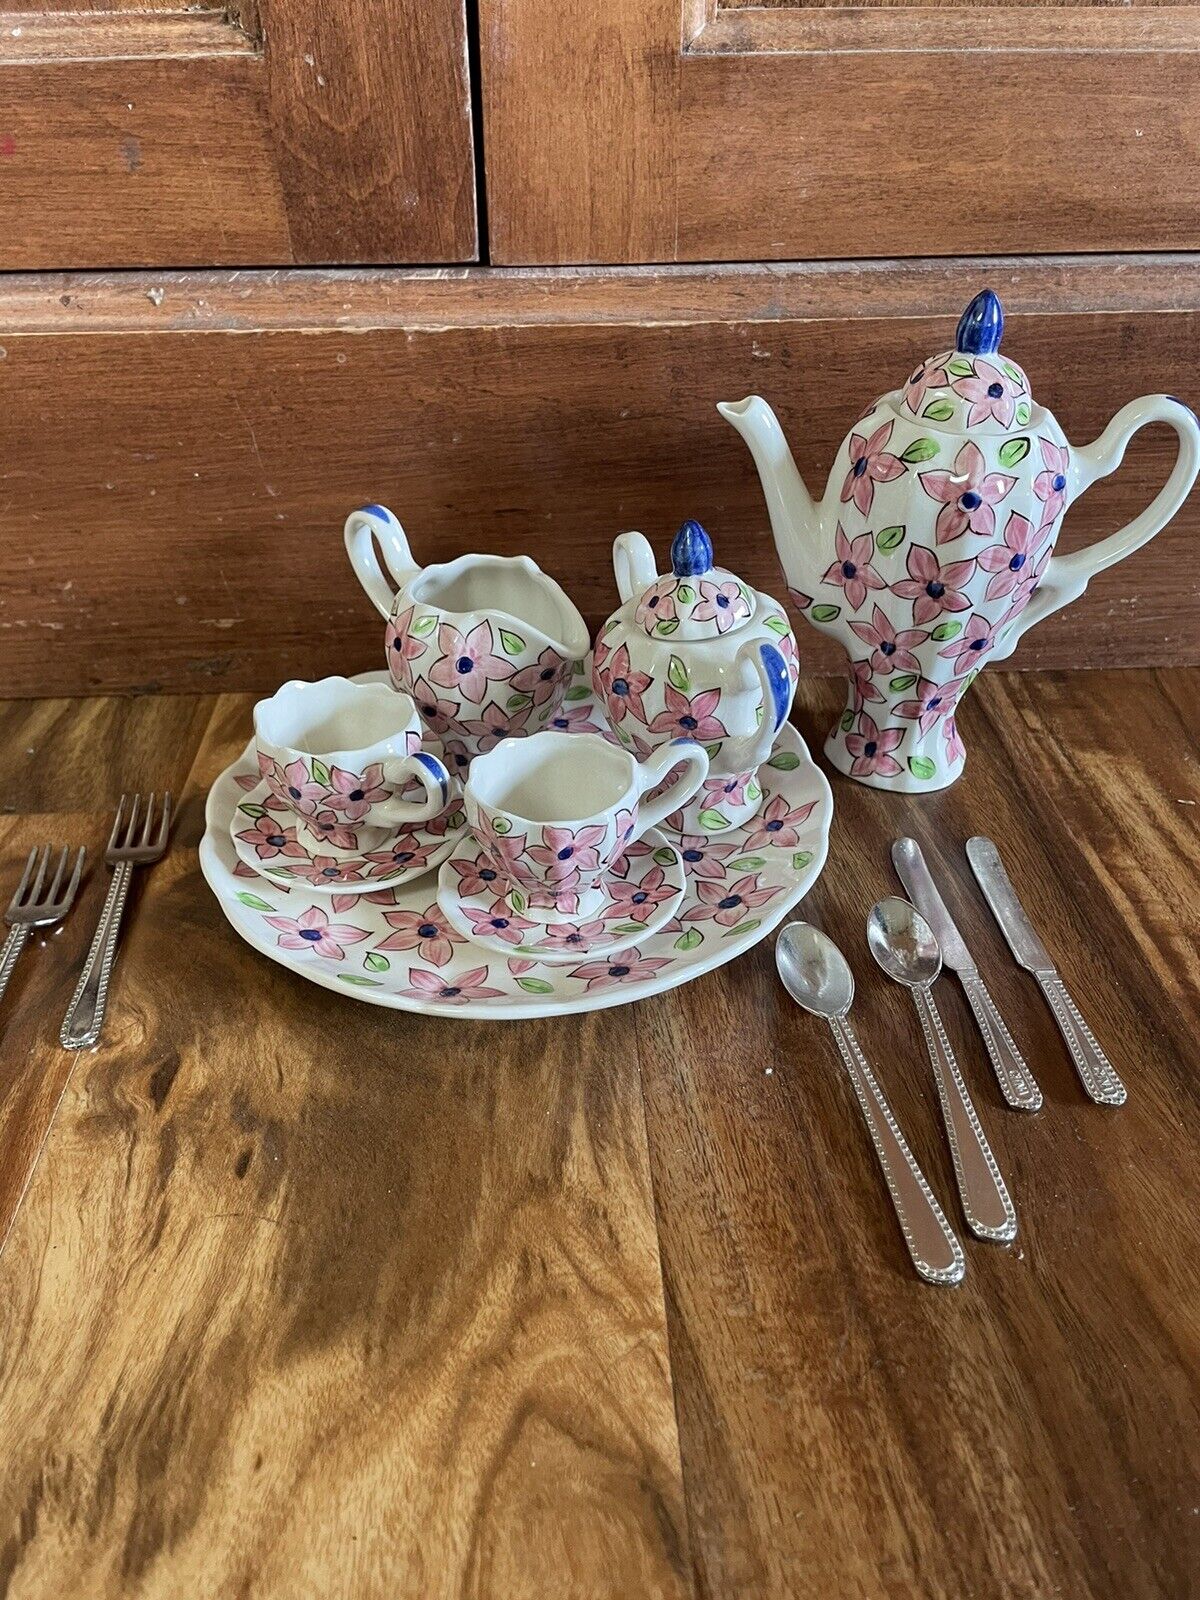 Beautiful Dainty, Floral Mini Tea Service for 2.  Hand Painted, Made in Thailand